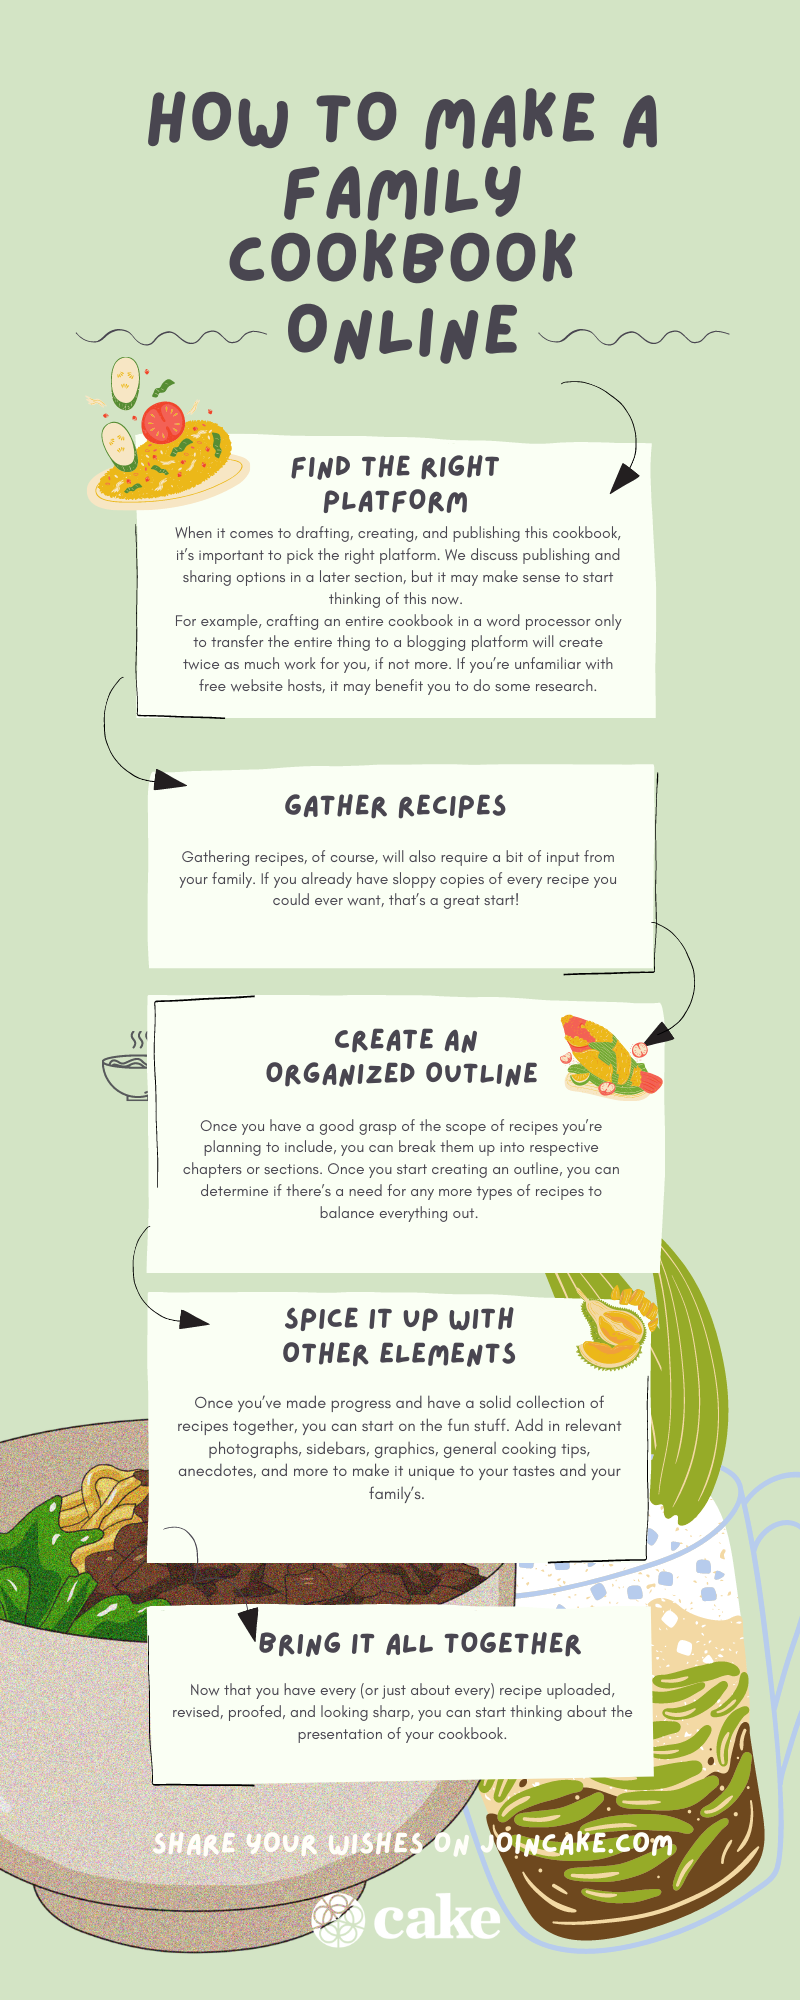 Infographic on how to make a family cookbook online